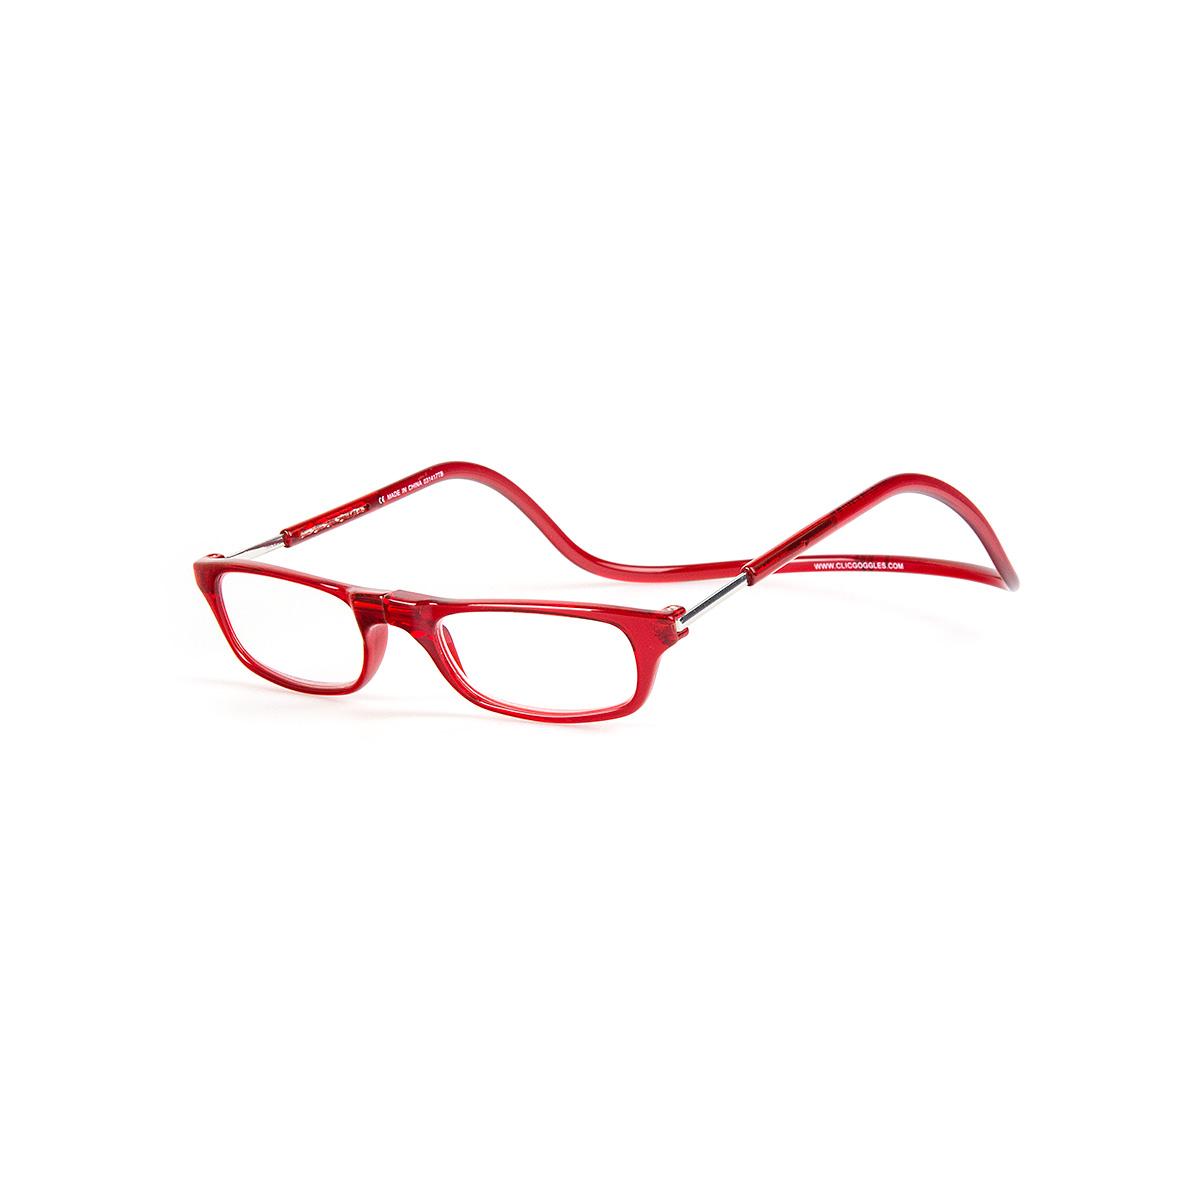  Clic Reading Glasses - Red